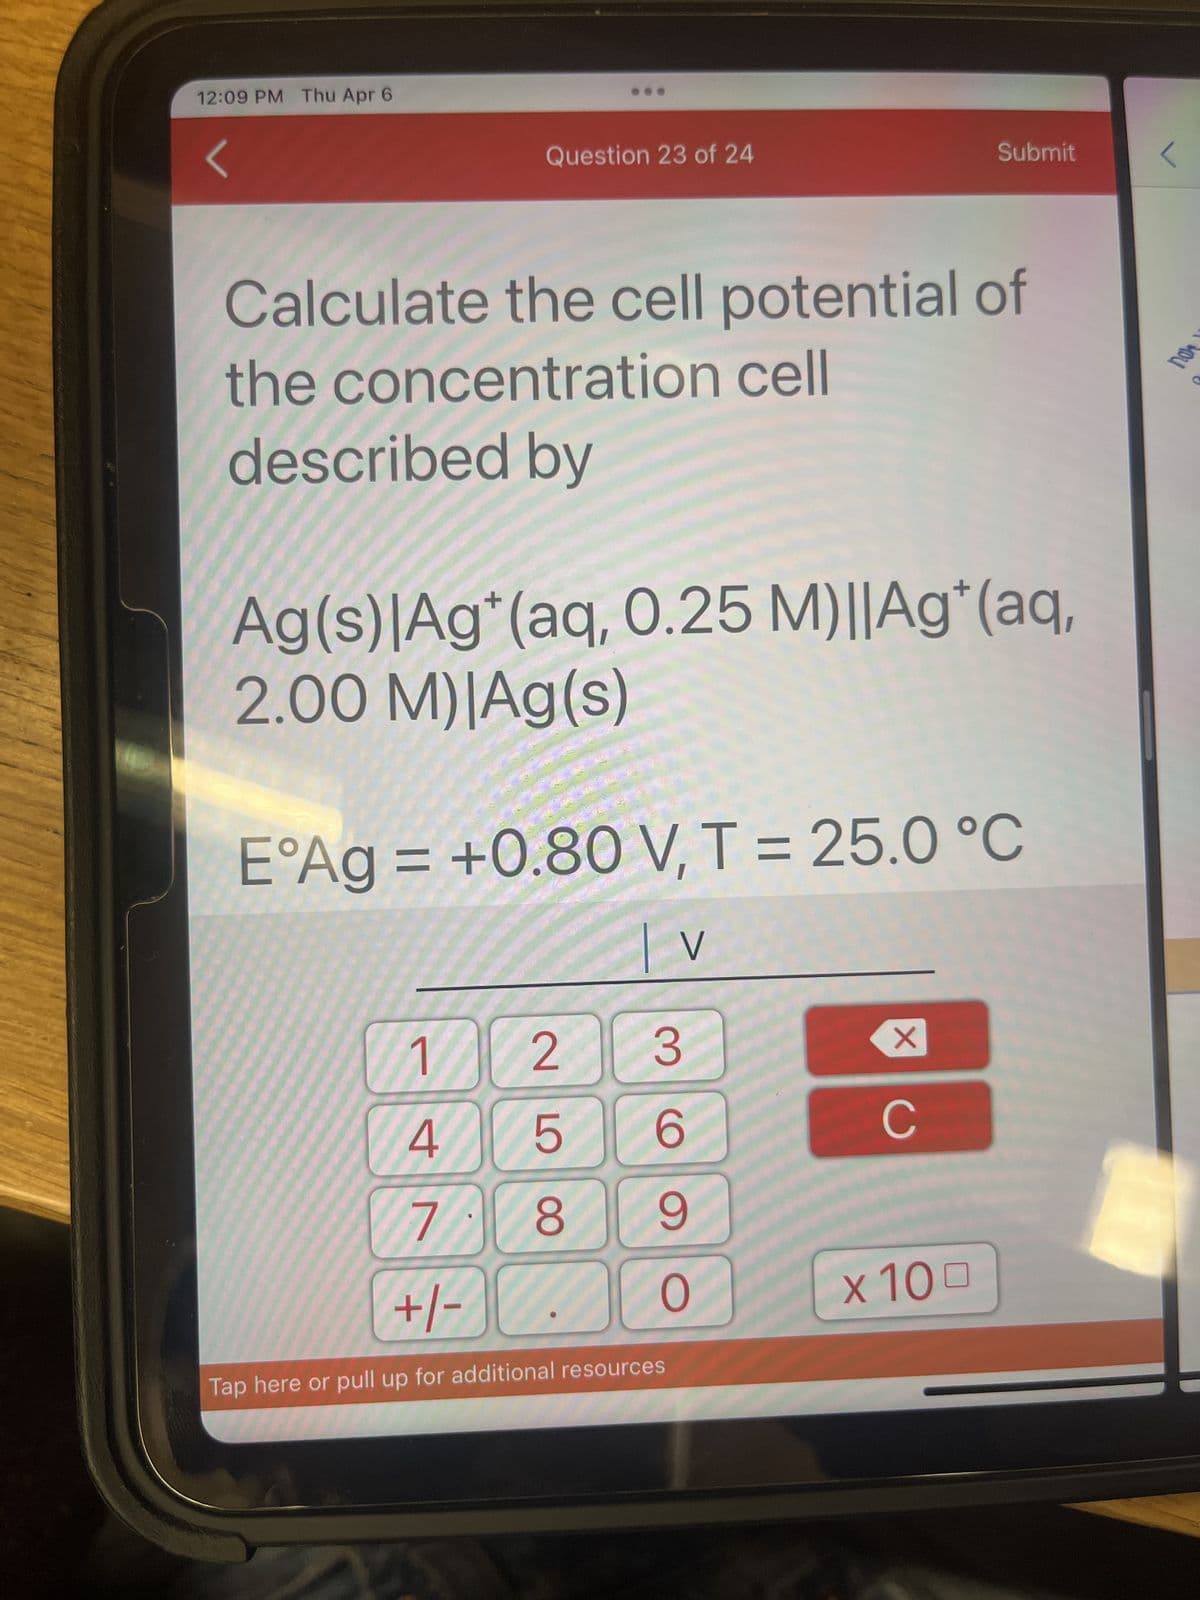 12:09 PM Thu Apr 6
Question 23 of 24
Calculate the cell potential of
the concentration cell
described by
Ag(s)|Ag*(aq, 0.25 M)||Ag* (aq,
2.00 M)|Ag(s)
E°Ag = +0.80 V, T = 25.0 °C
| v V
S
25
3
6
9
1
4
7. 8
+1-
Tap here or pull up for additional resources
O
Submit
X
C
x 100
YOU